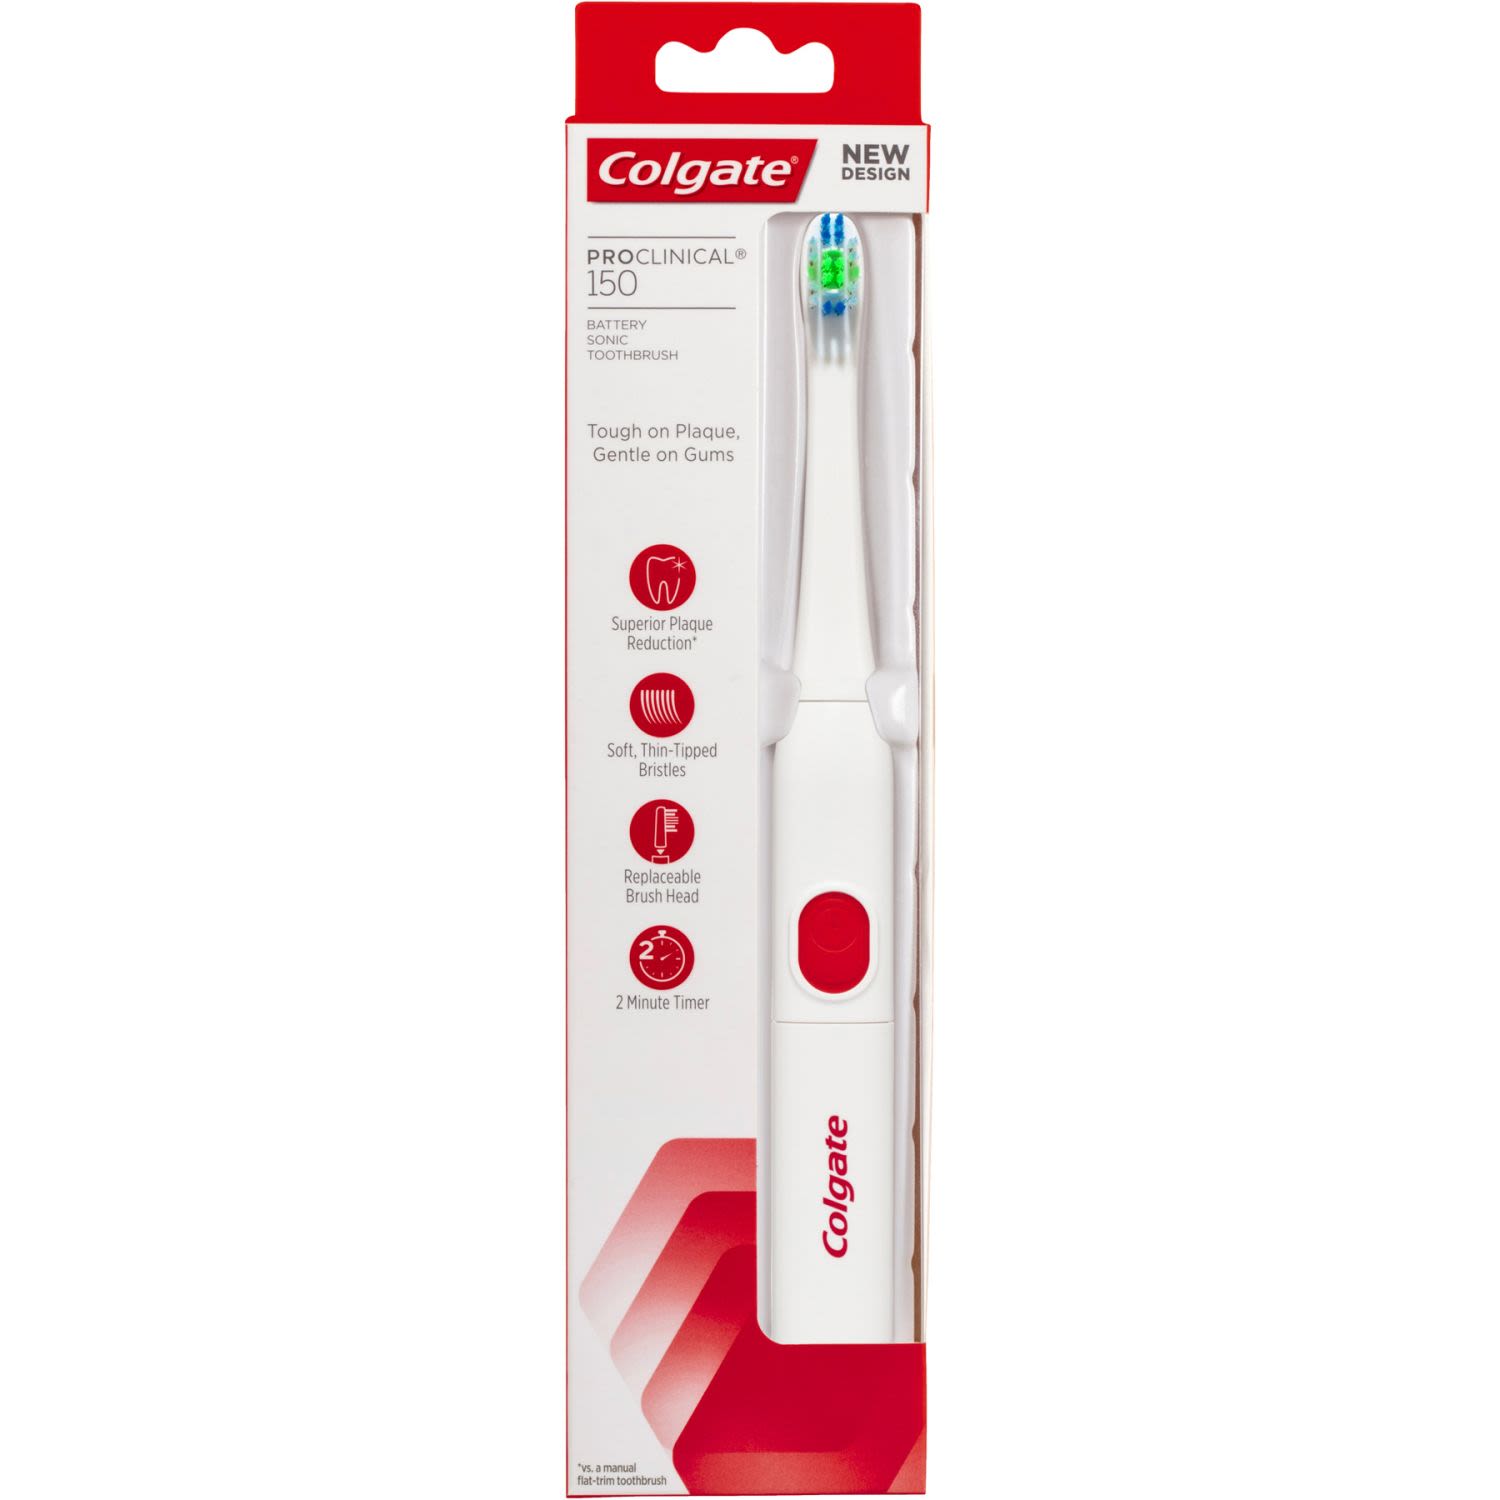 Colgate Pro Clinical 150 Electric Battery Sonic Toothbrush Soft, 1 Each